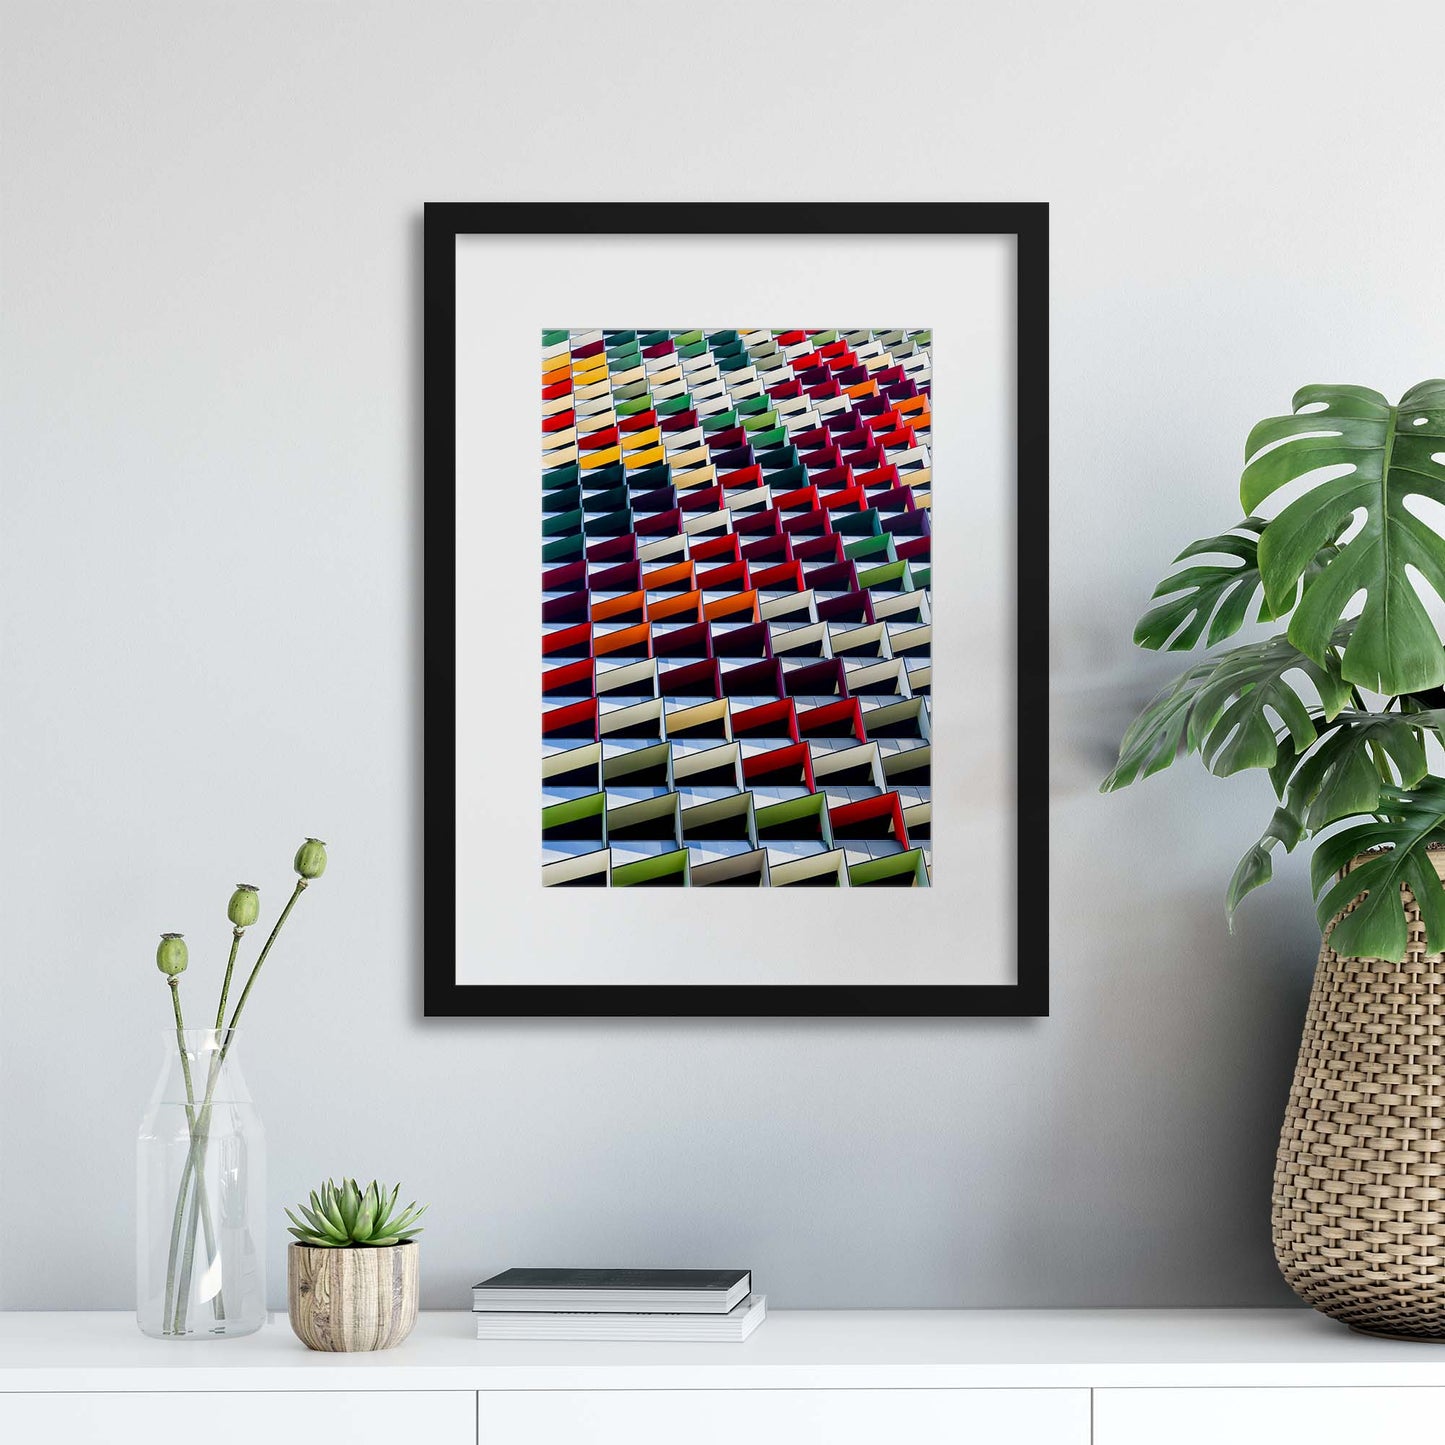 Origami by Jared Lim Framed Print - USTAD HOME